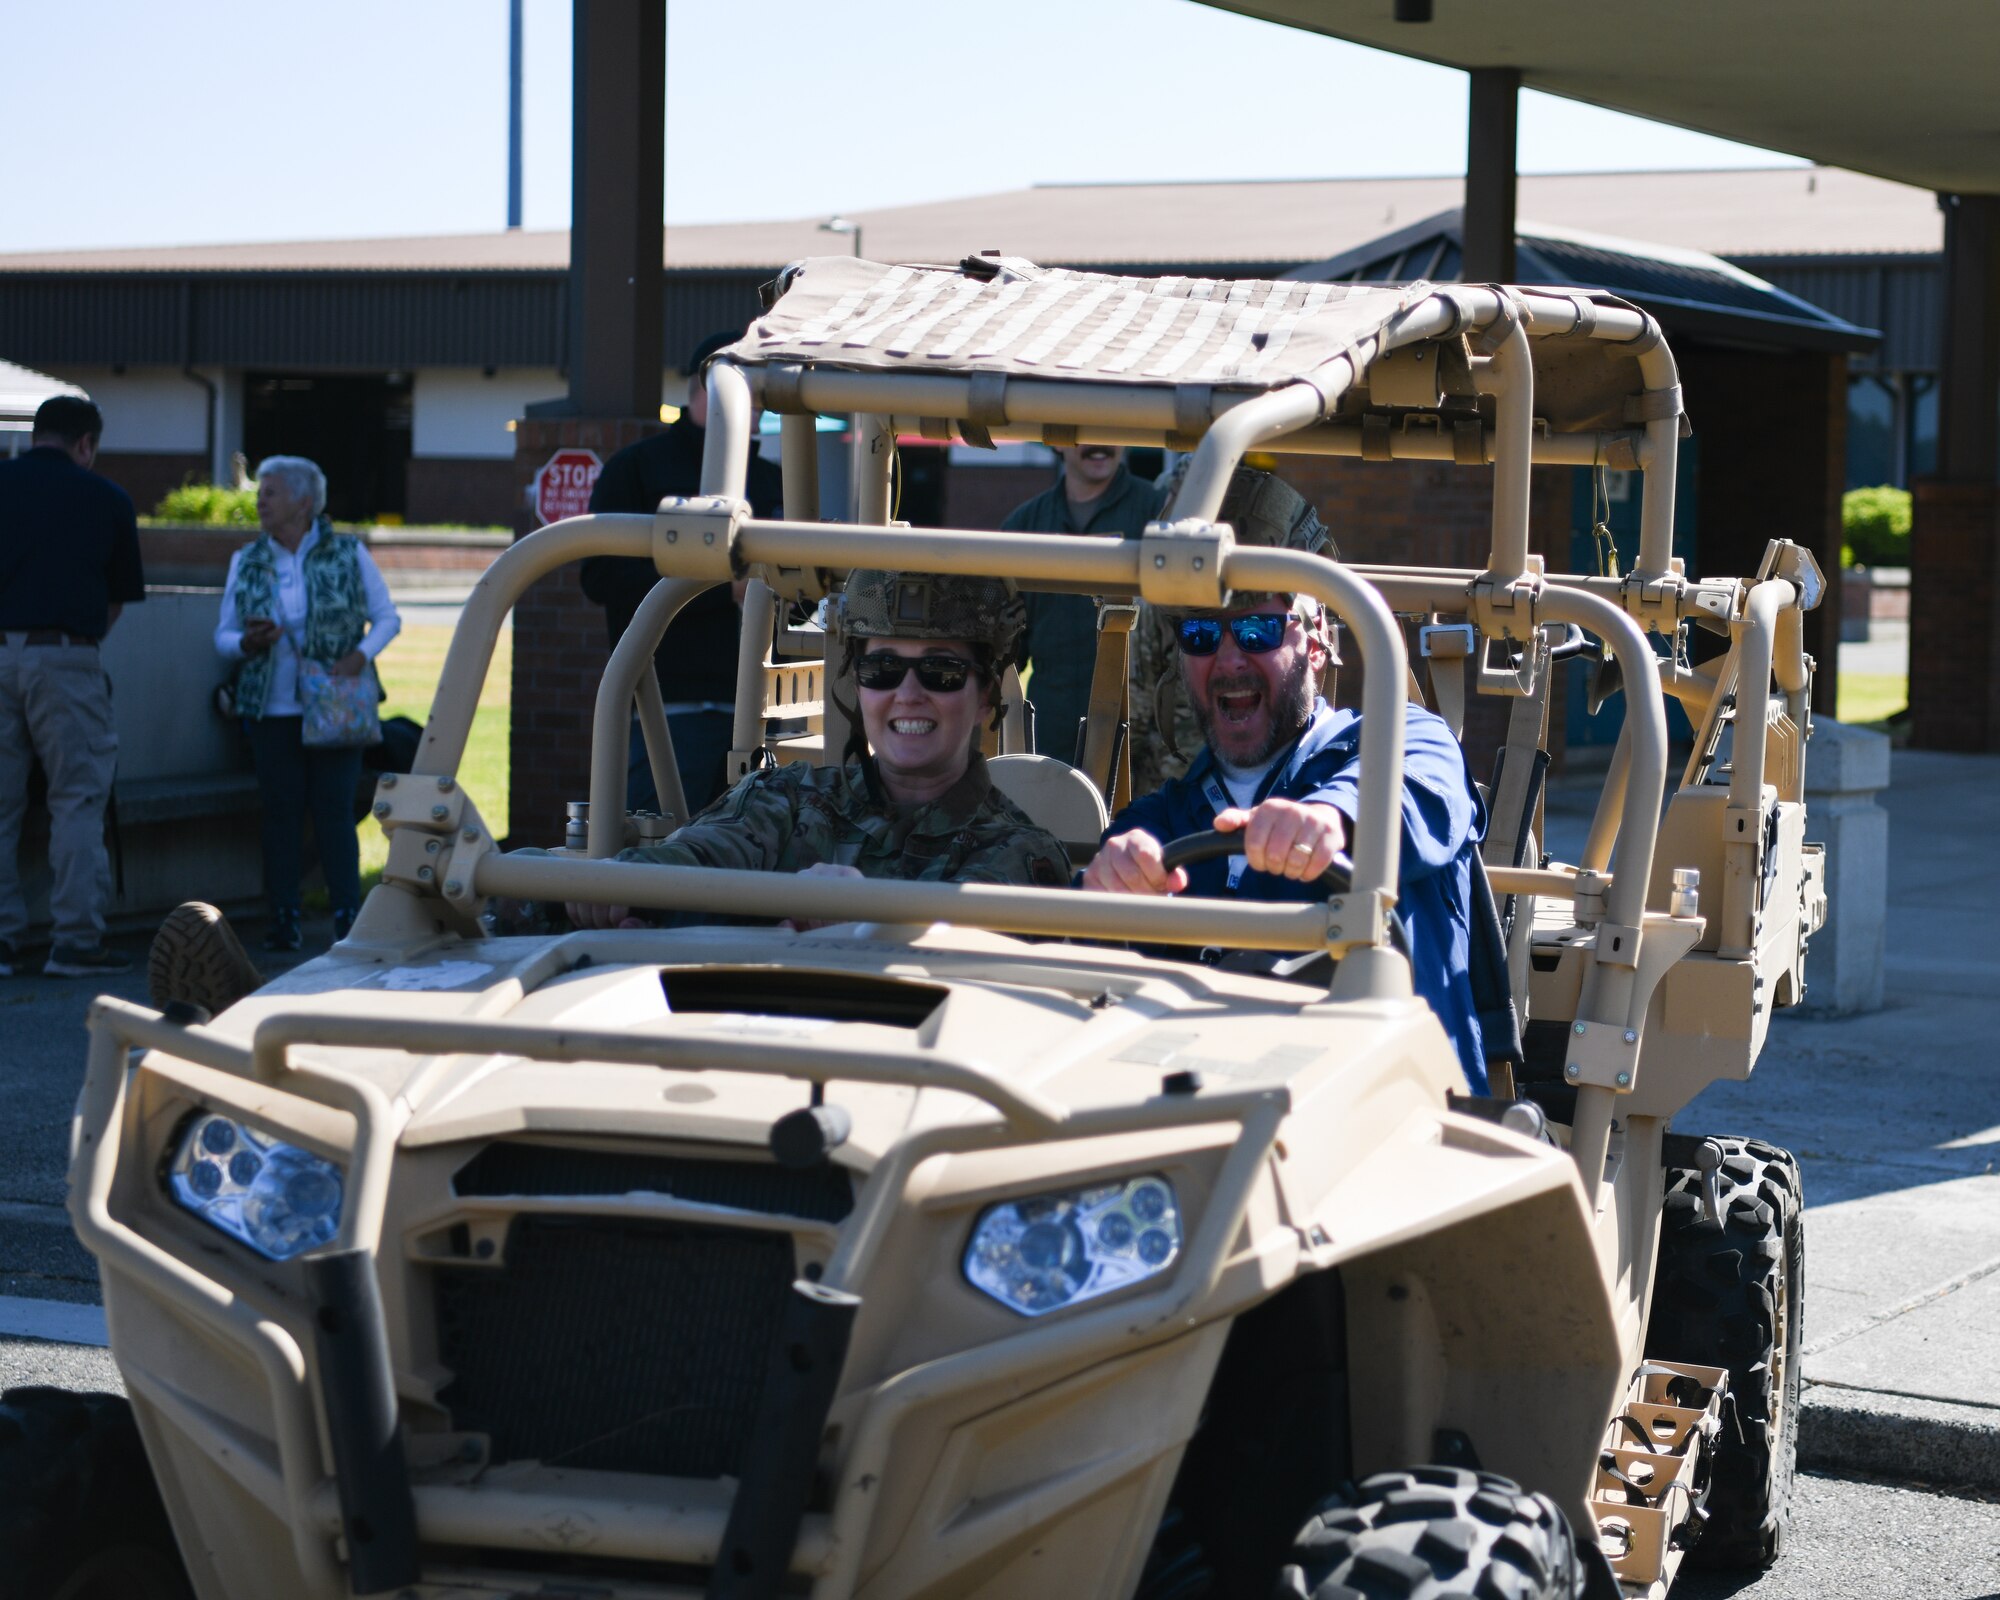 An airman sits in an open ATV like vehicle that is tan with a civilian employer as they pose for a photo.